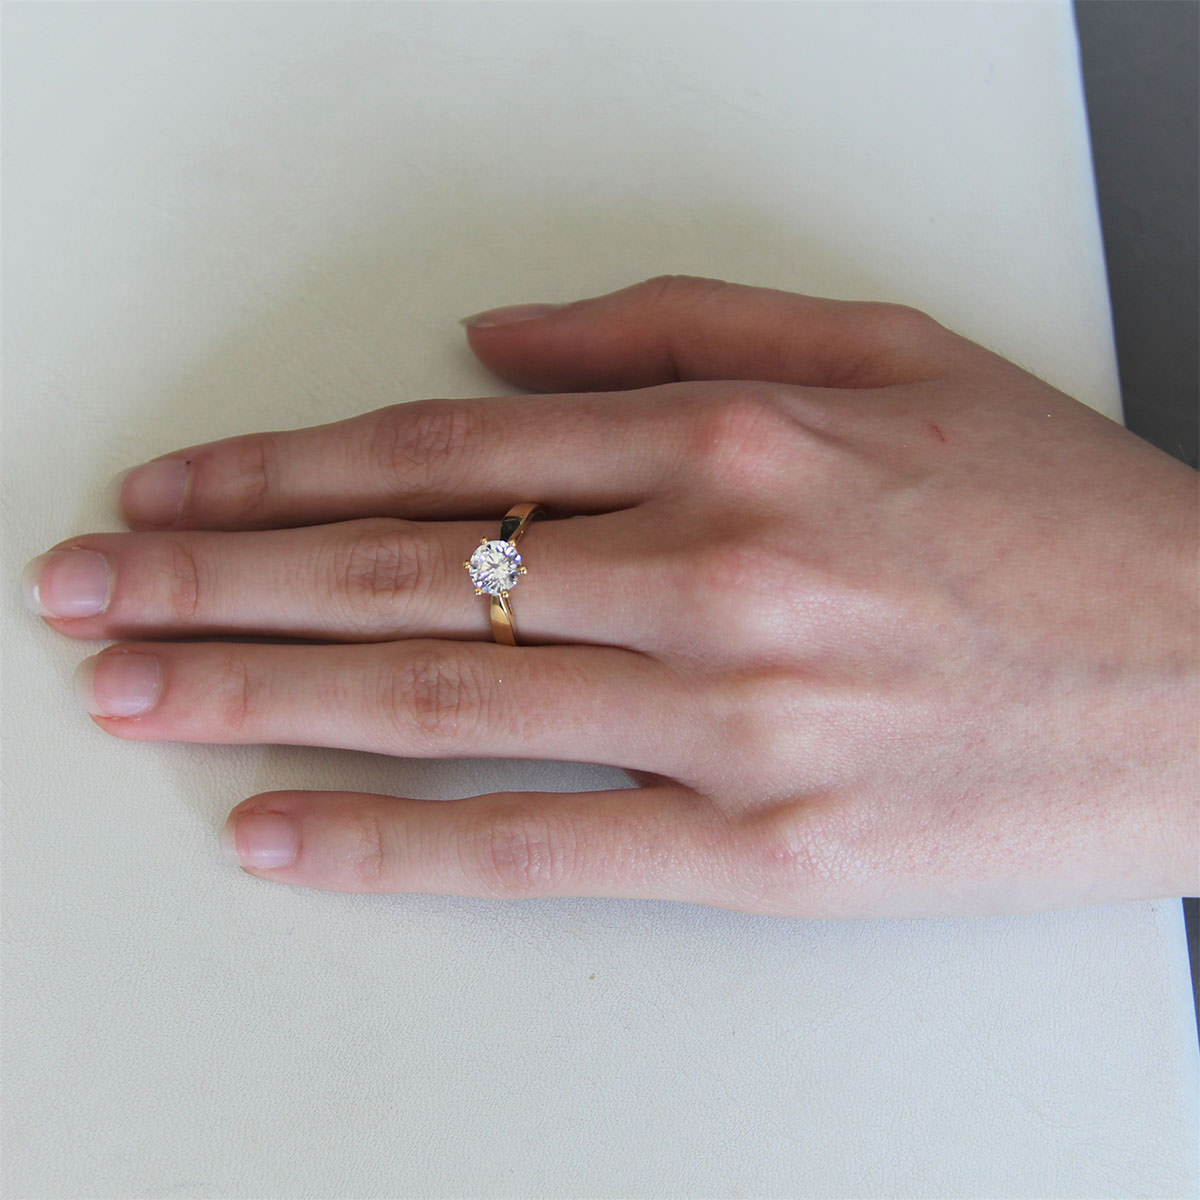 Bague solitaire or 18k 750 jaune oxyde- 2grs- 54 -